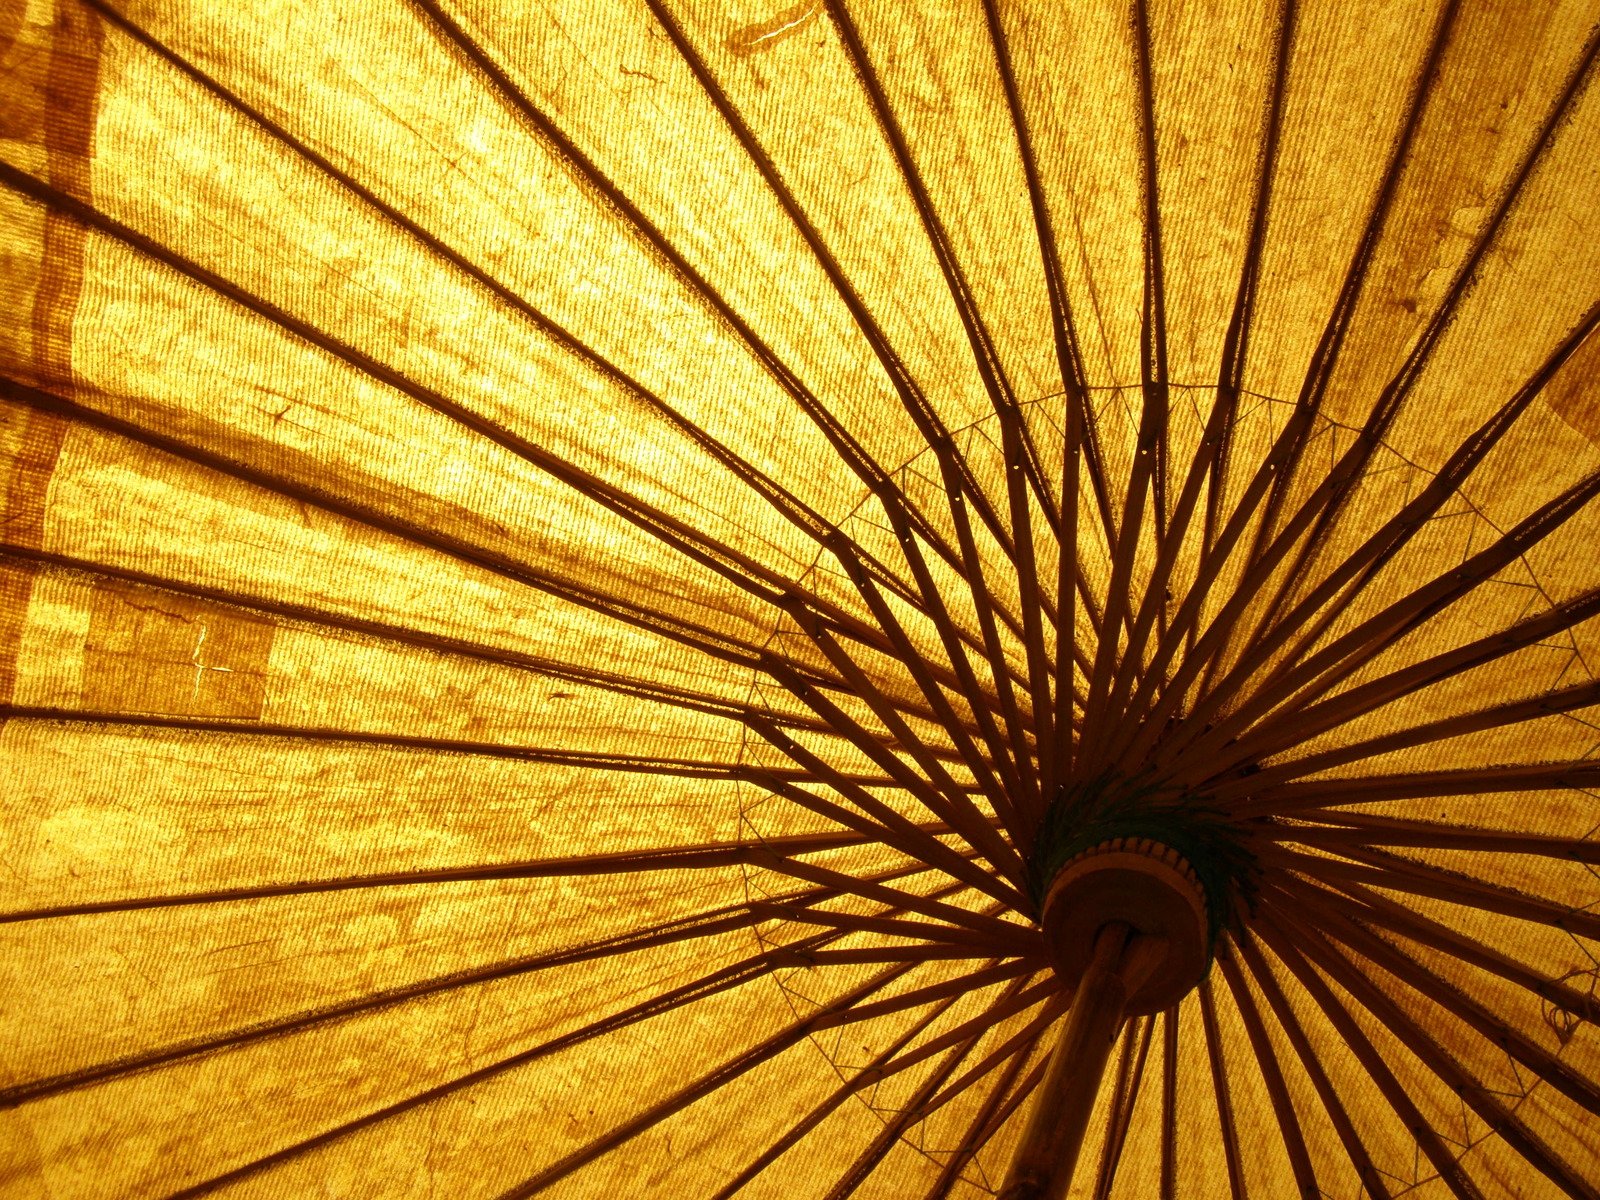 the side view of a sunlit umbrella with long lines